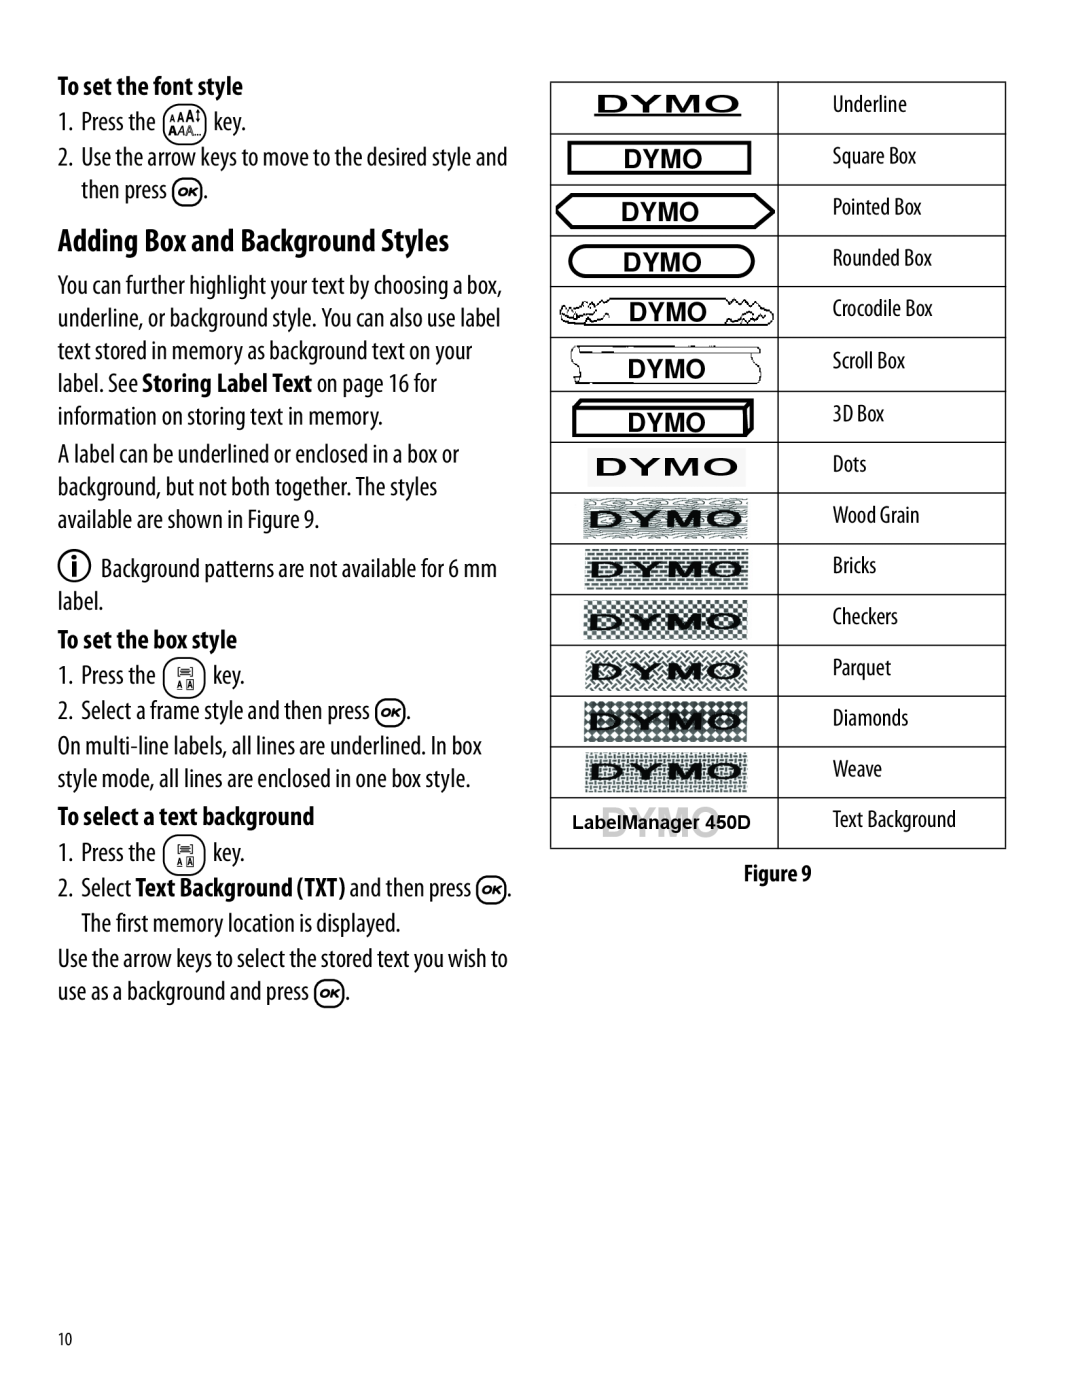 Dymo 450D To set the font style, Use the arrow keys to move to the desired style and then press, To set the box style 